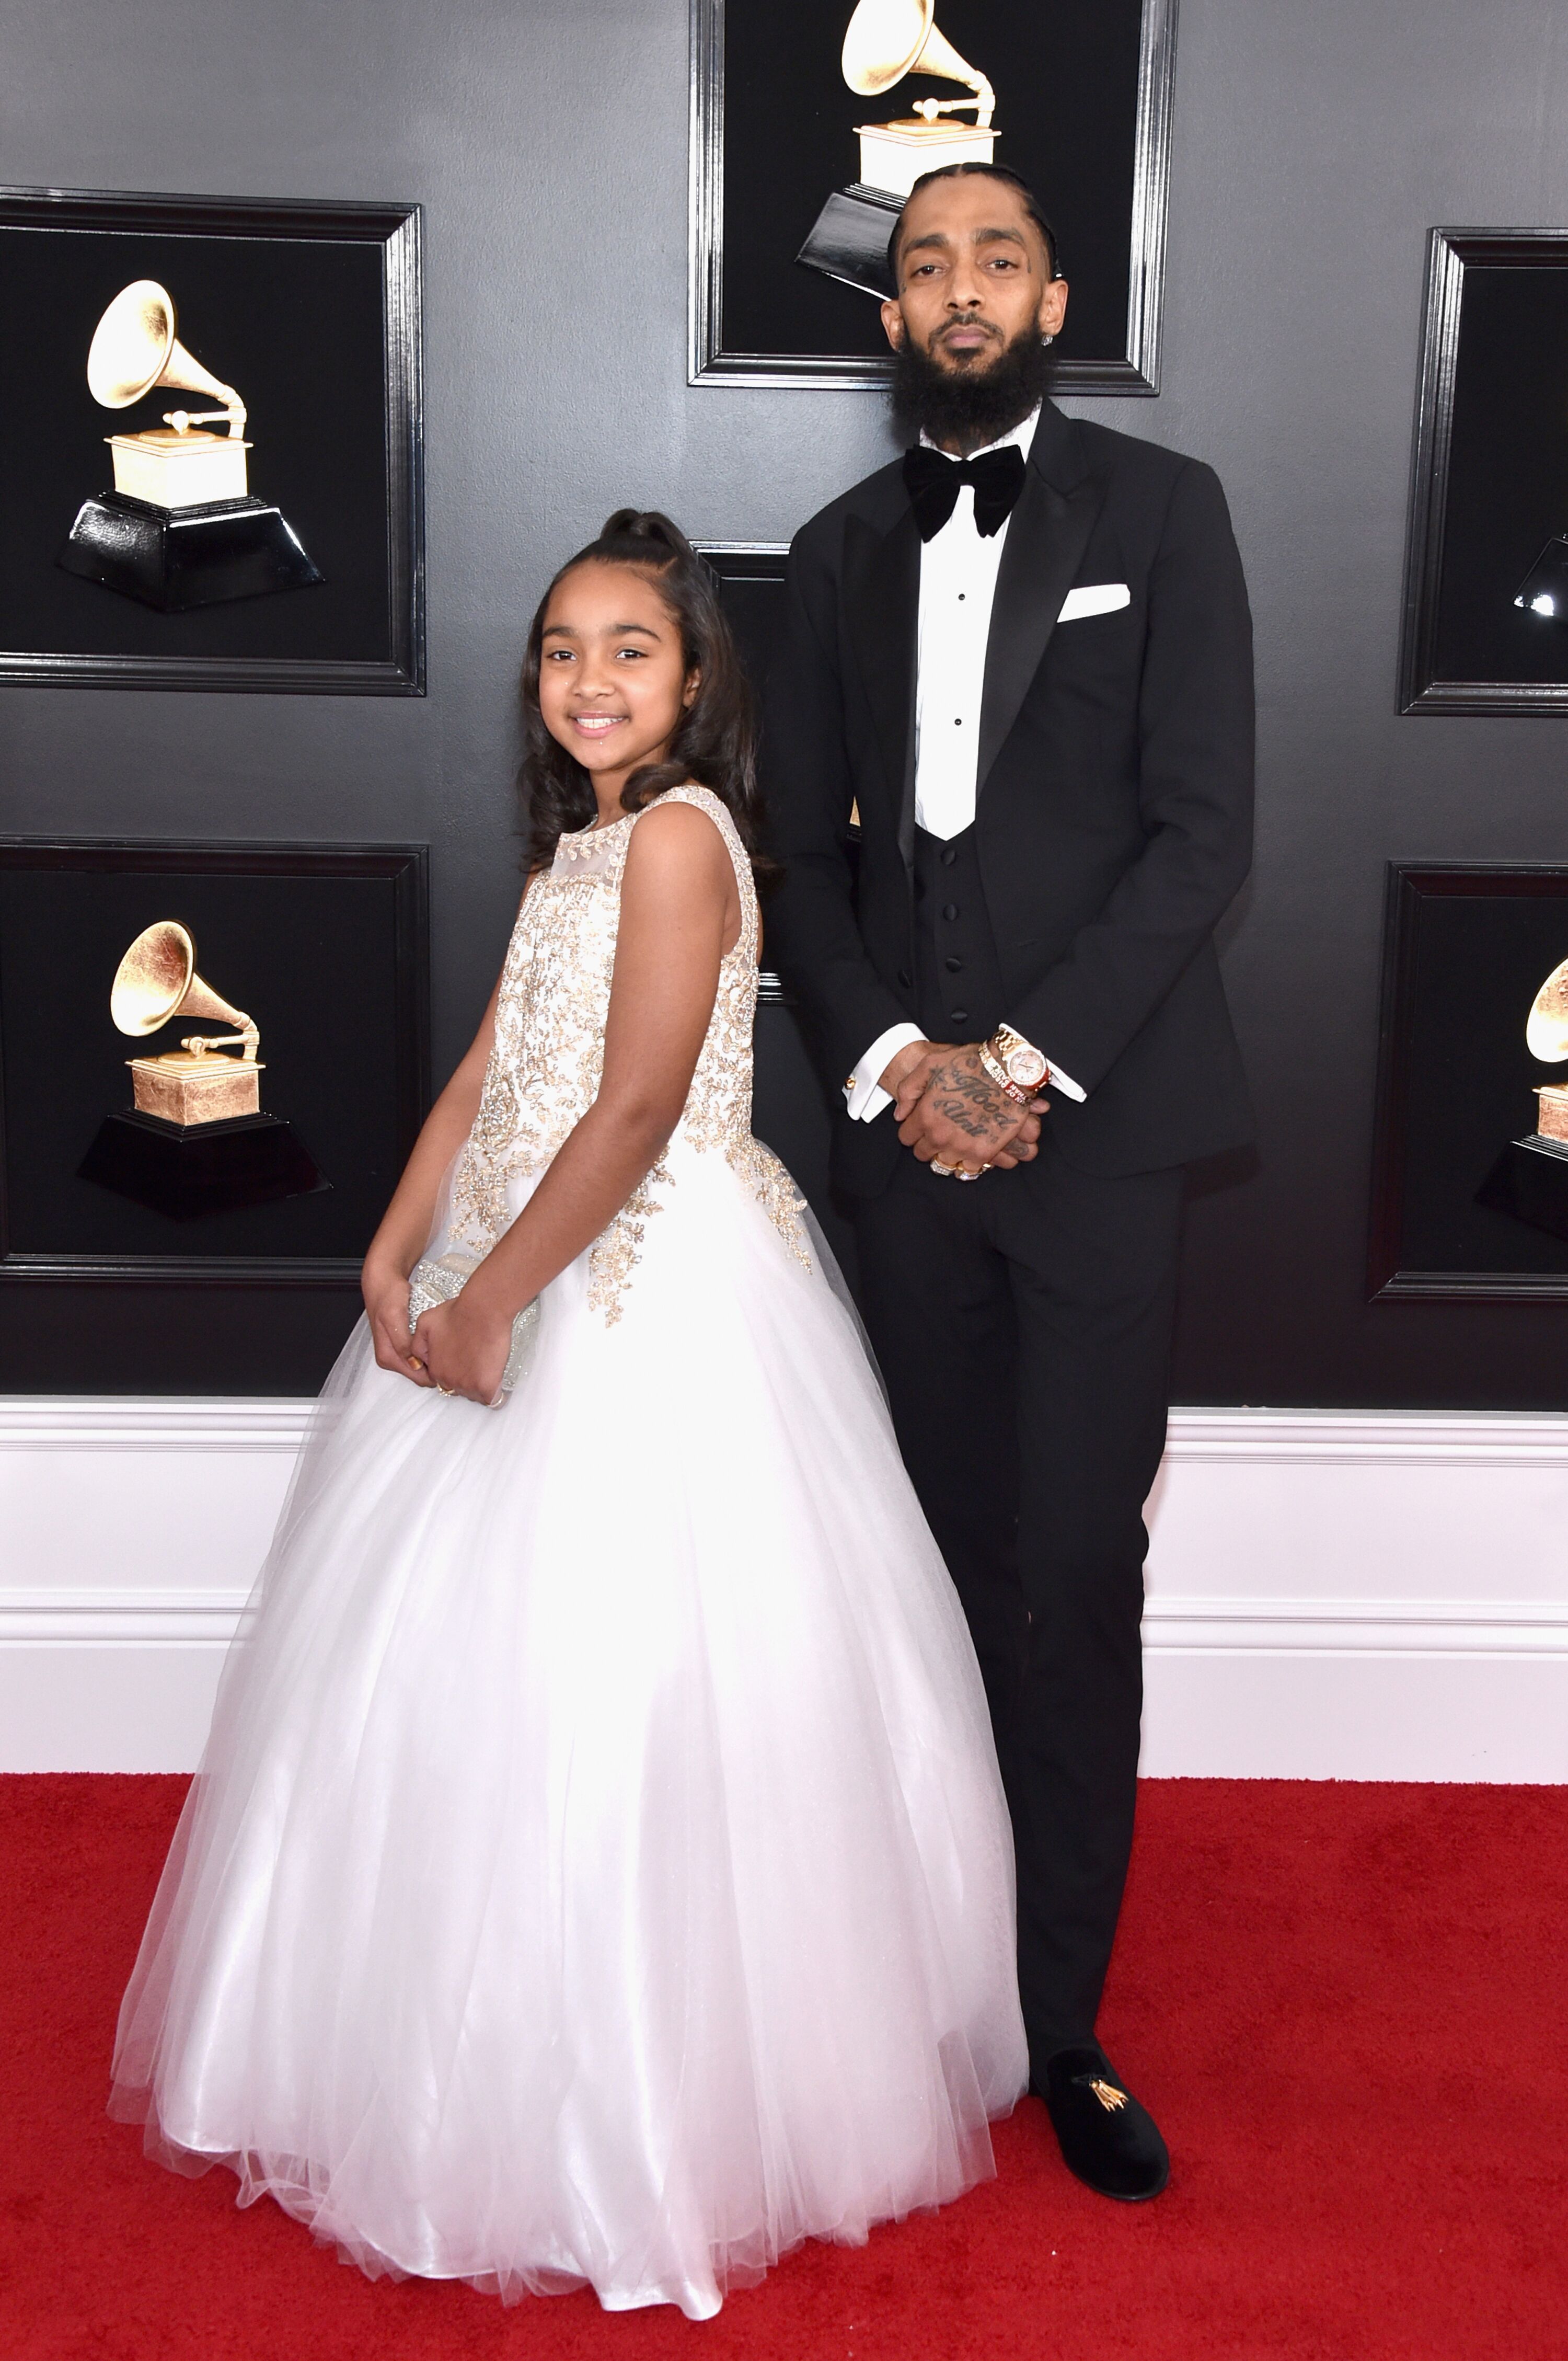 Rapper Nipsey Hussle with his daughter Emani, attend the 61st Grammy Awards in 2019. | Photo: Getty Images